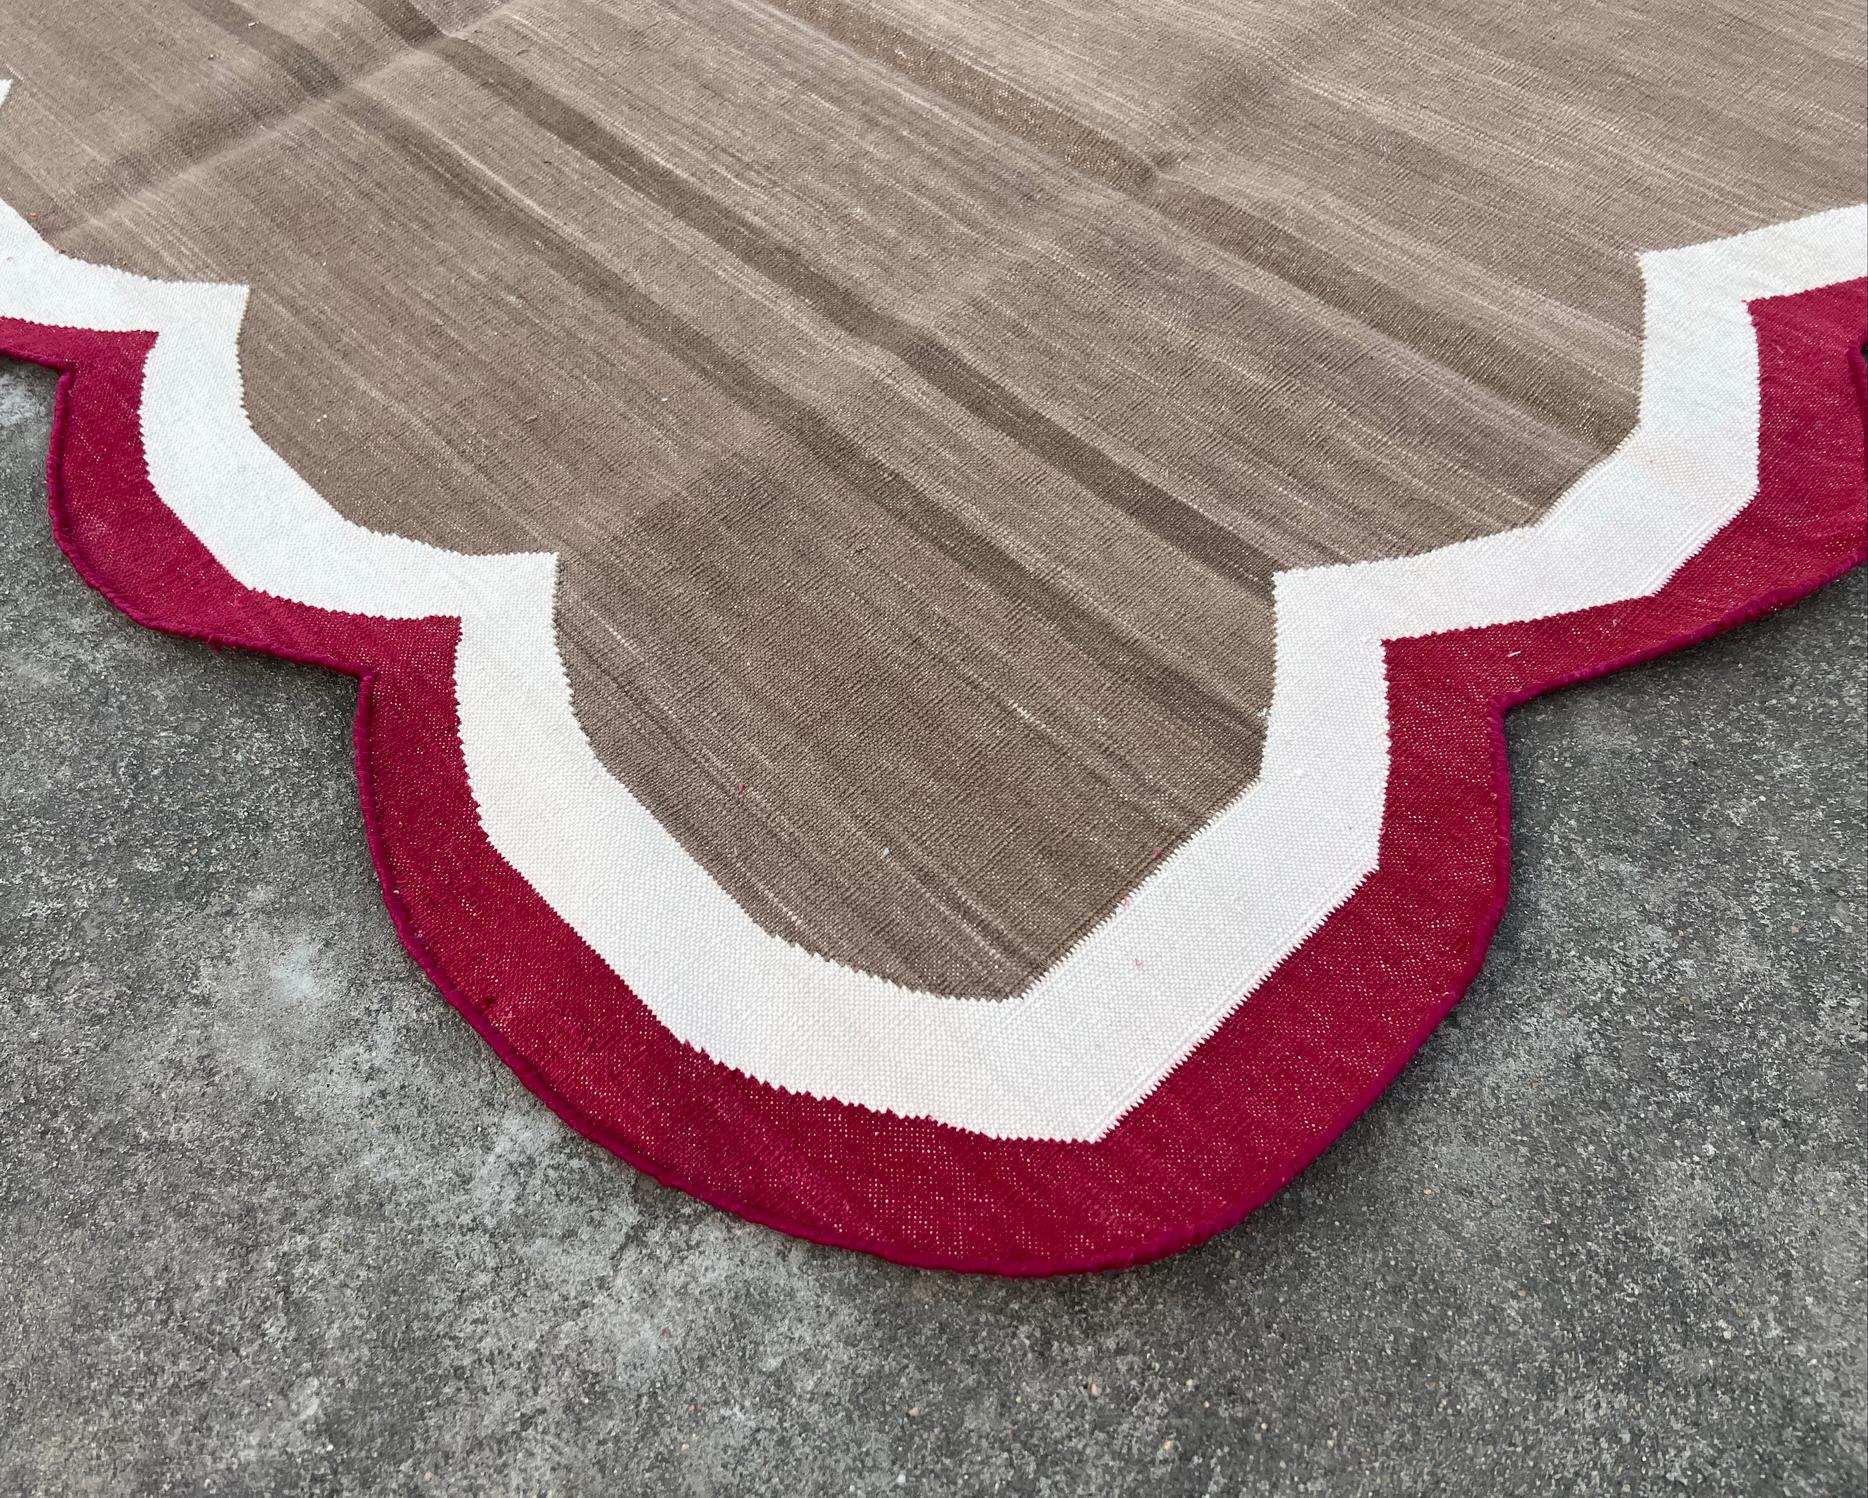 Mid-Century Modern Handmade Cotton Area Flat Weave Rug, 3x5 Brown And Red Scalloped Kilim Dhurrie For Sale